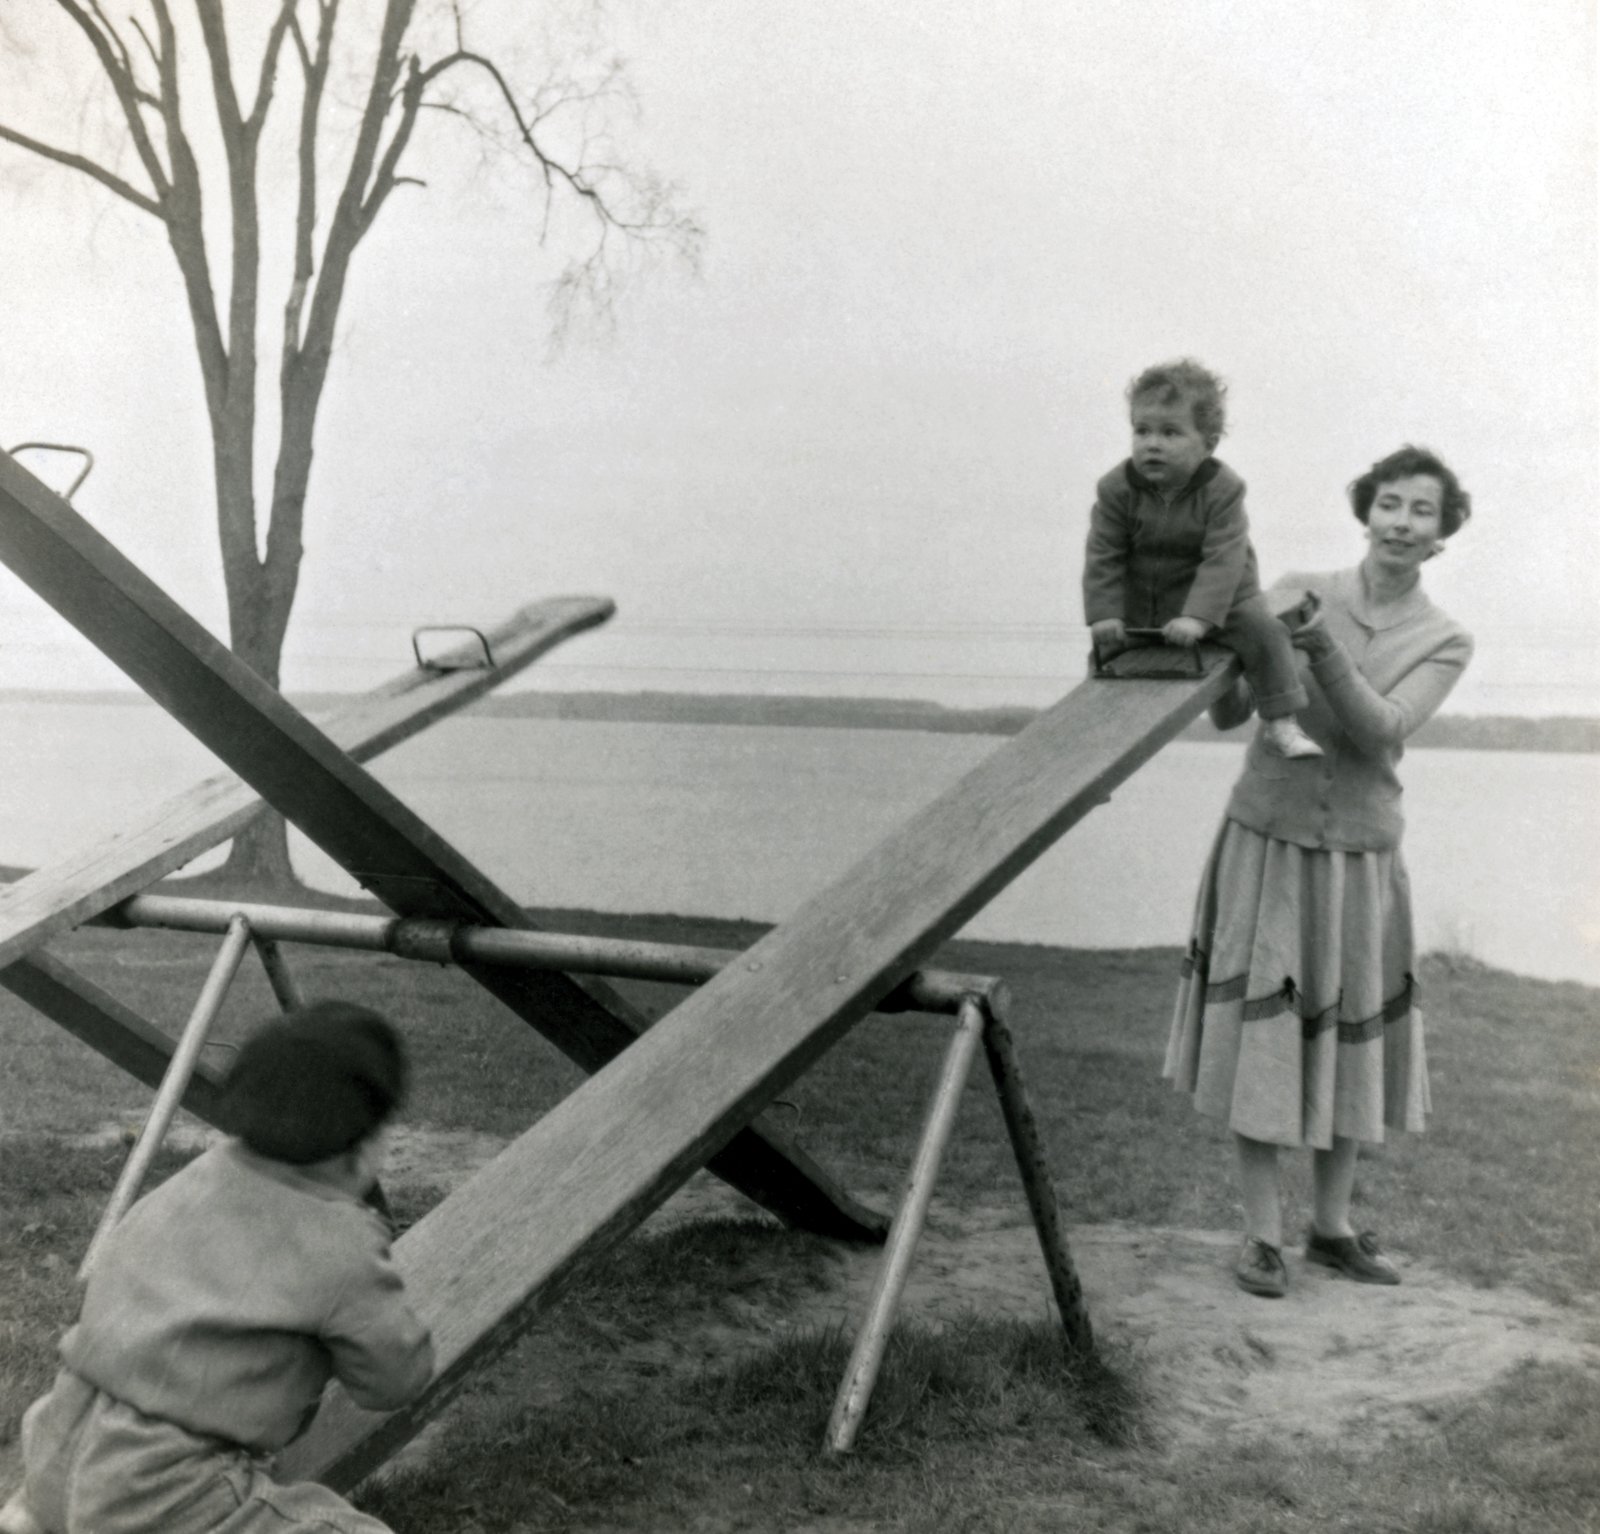 Neil and Annette at the playground, April 1956, Barrie, Ontario.